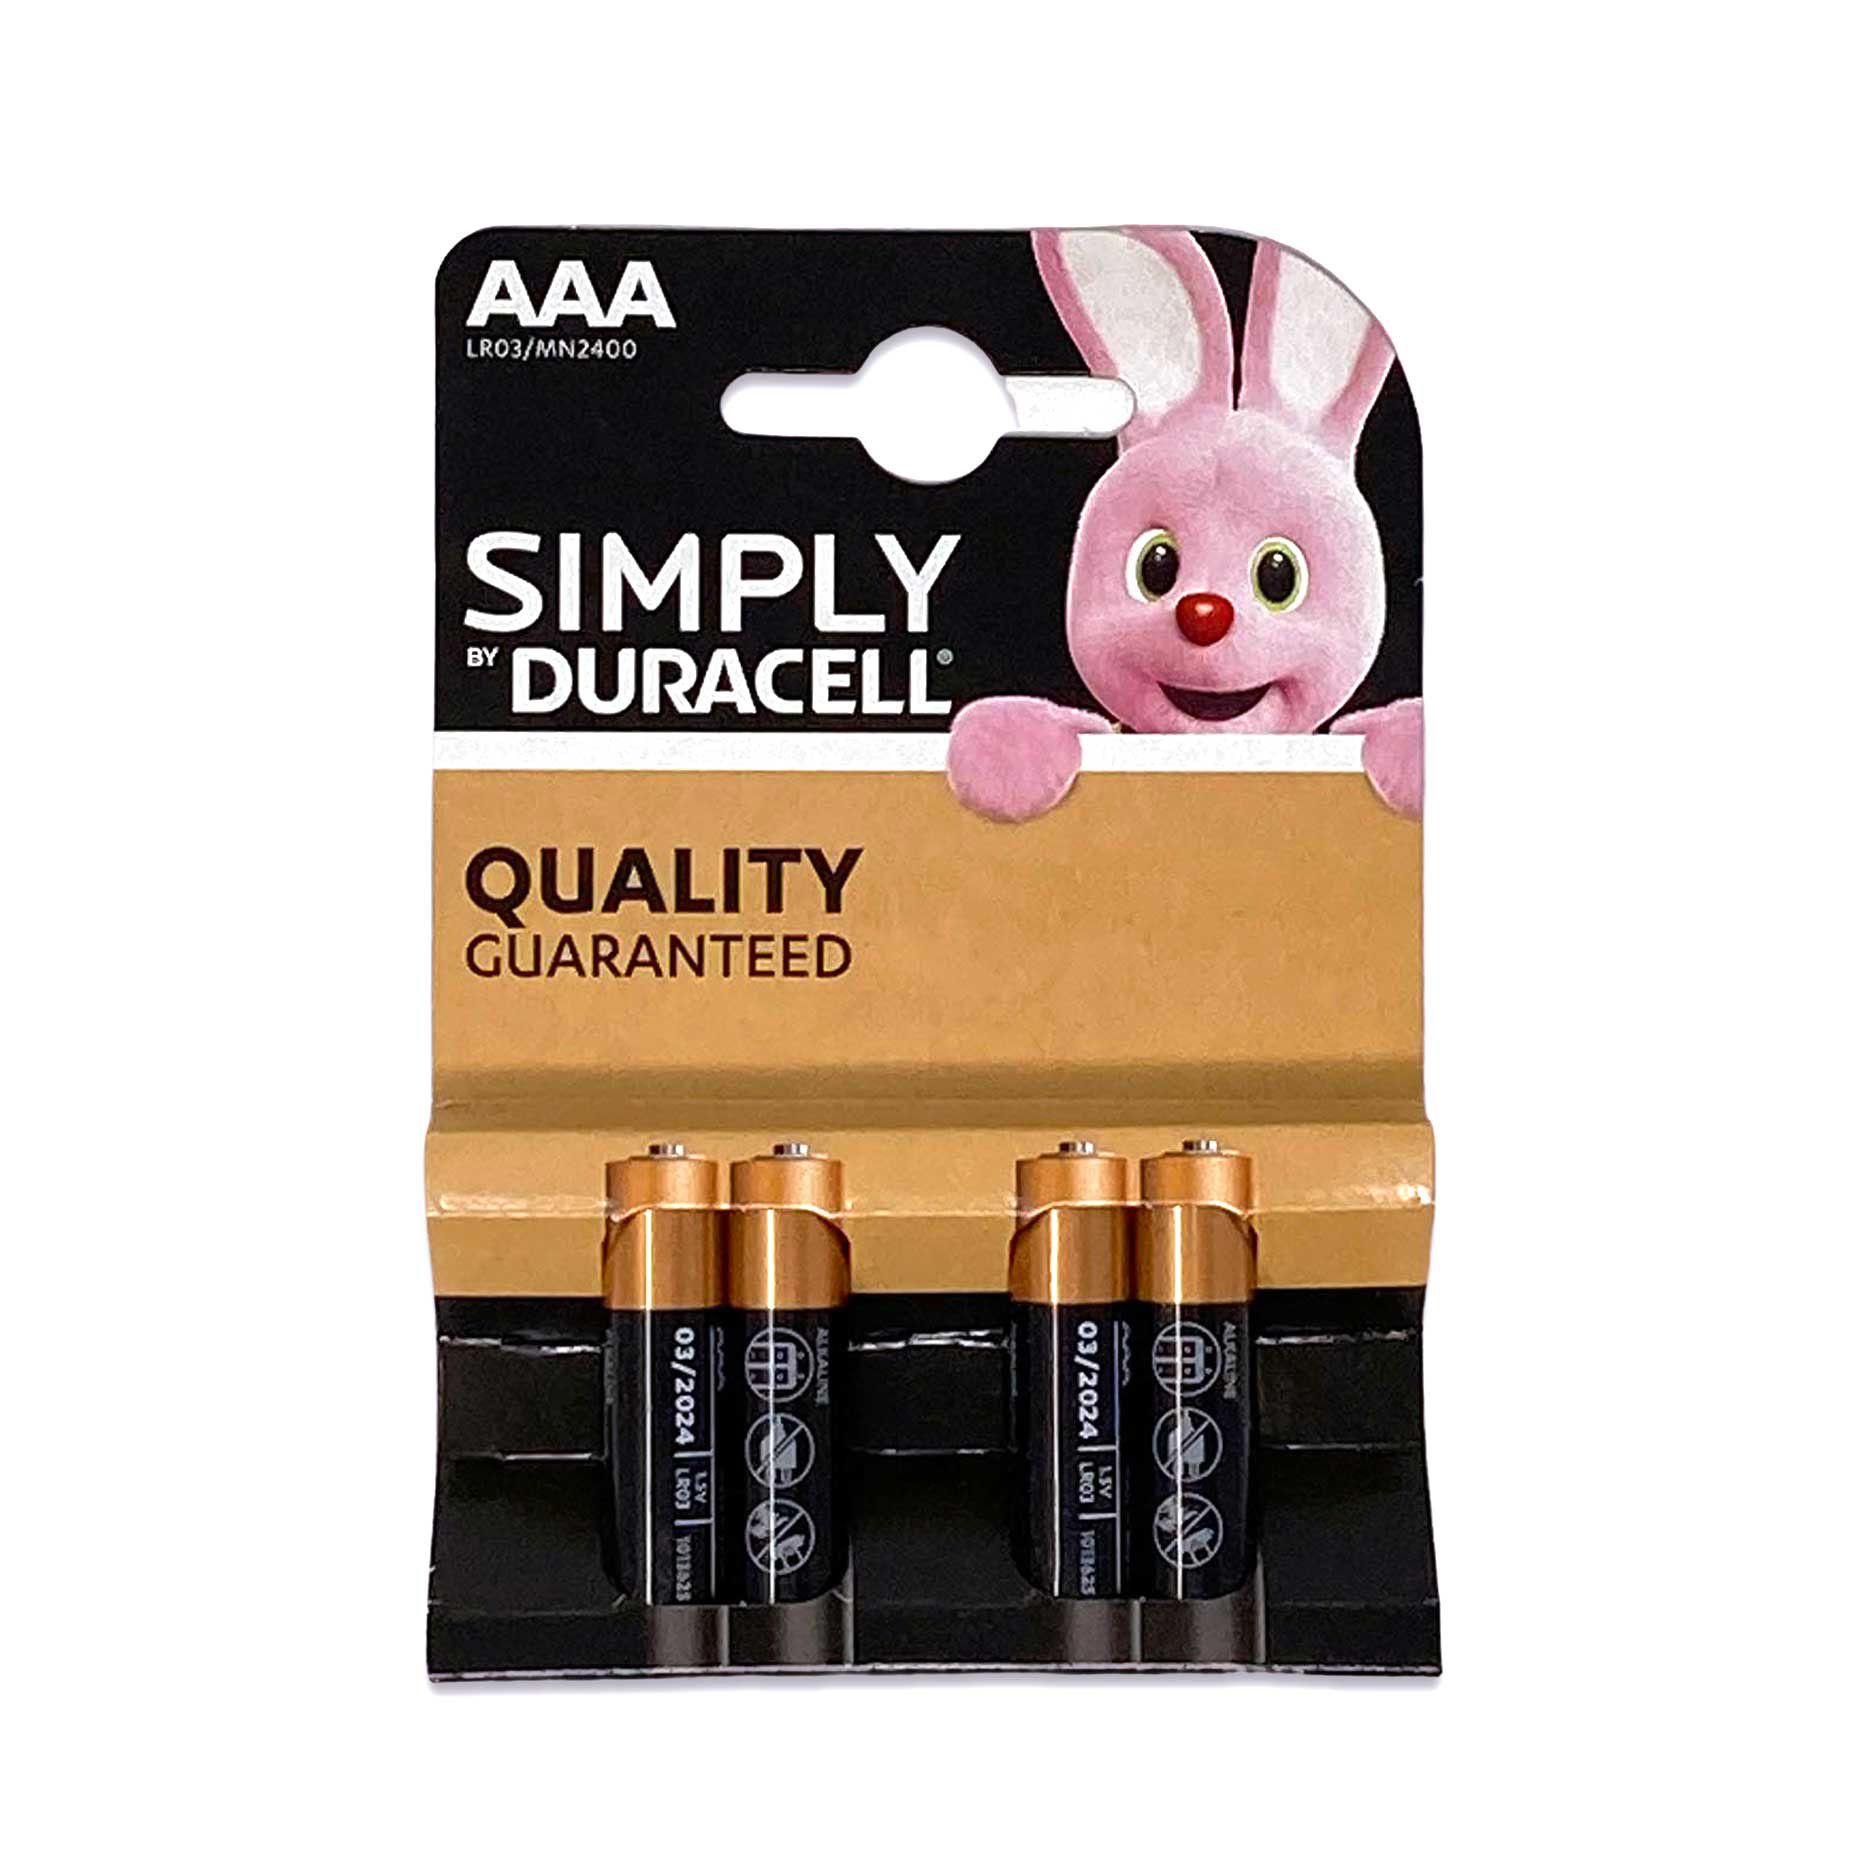 duracell-simply-aaa-alkaline-batteries-pack-of-4-aldi